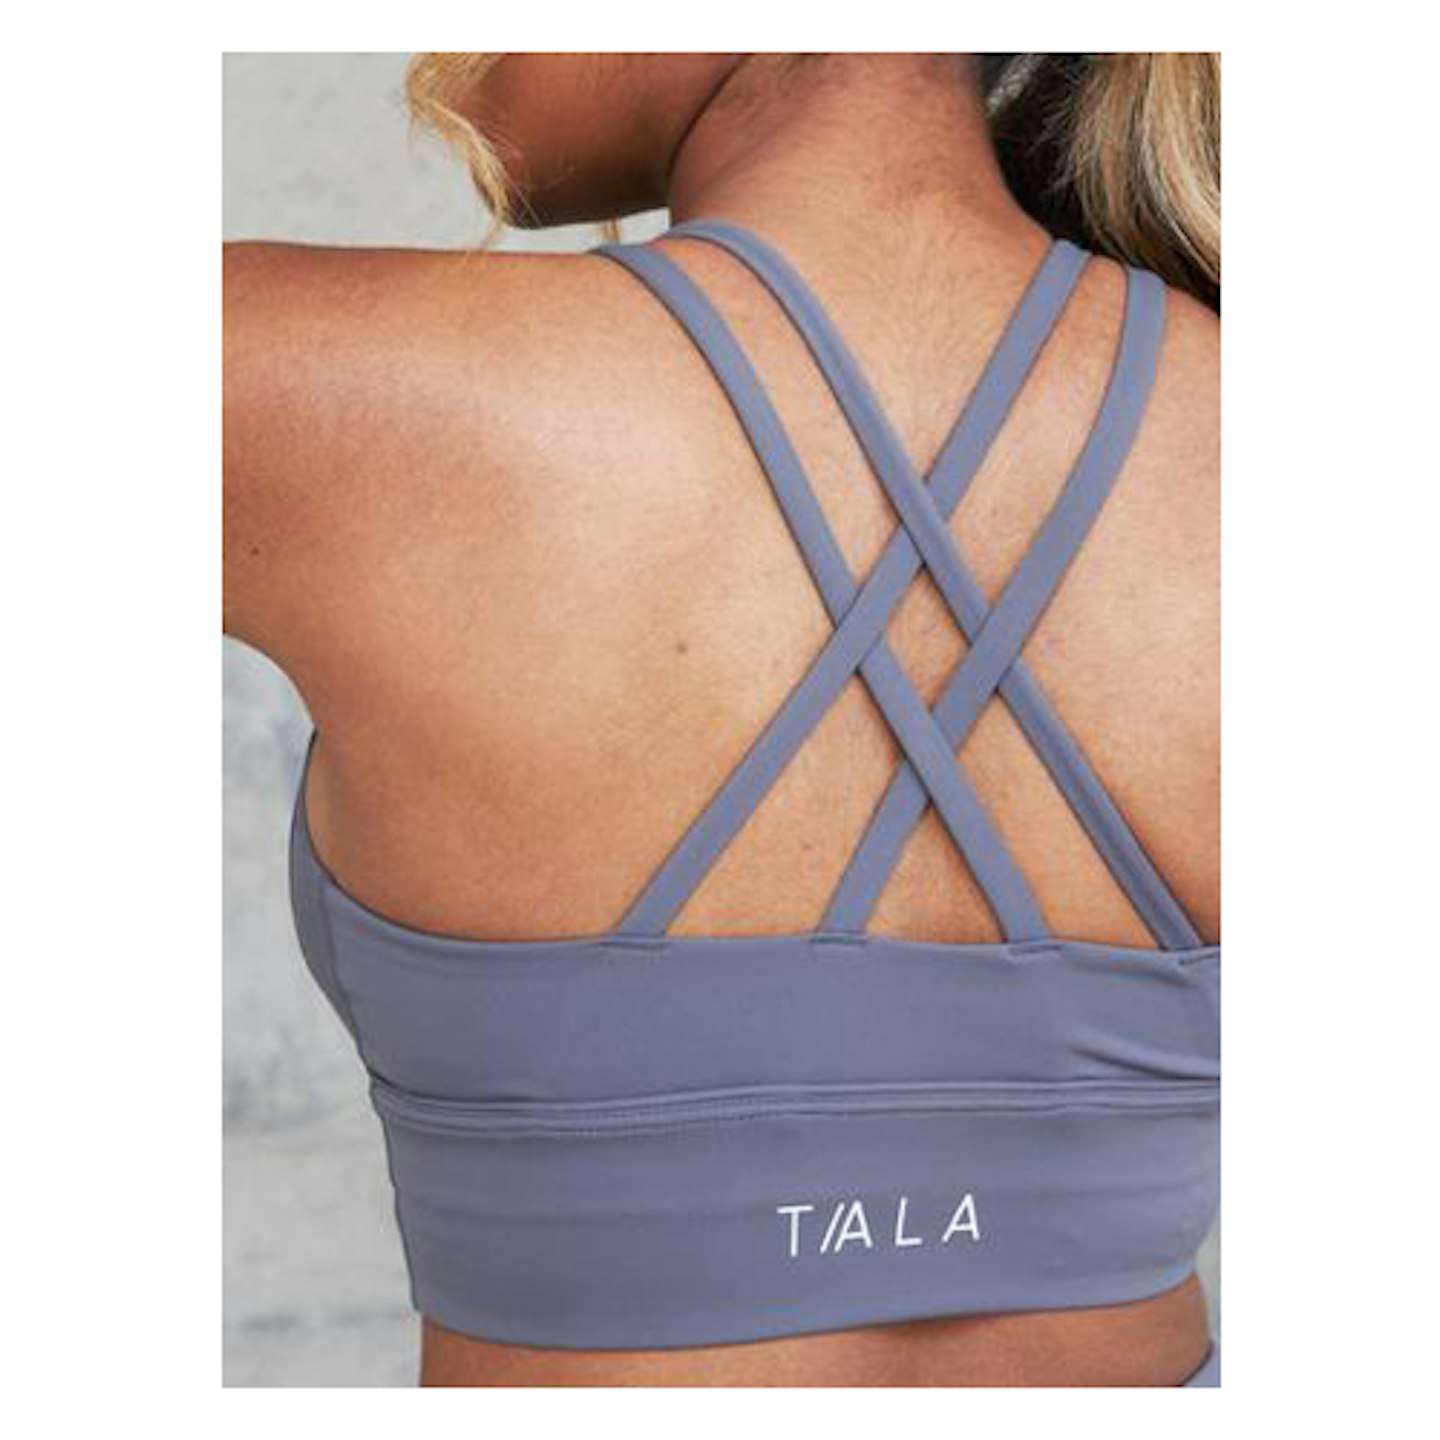 10 stylish sports bras 2021 that will motivate you to workout